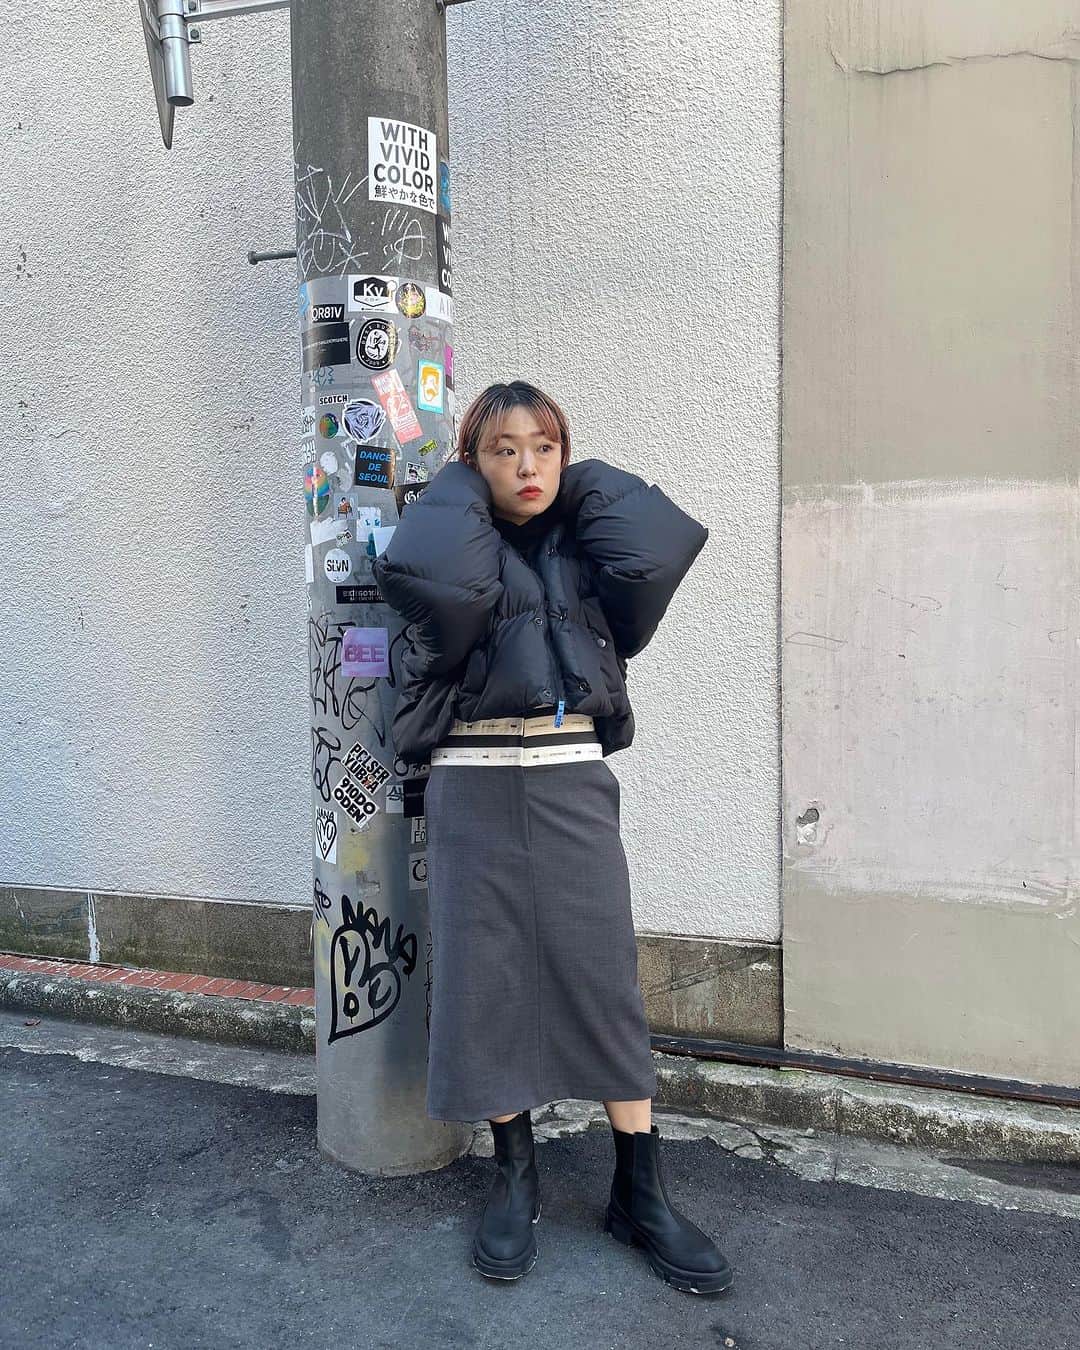 MIDWEST TOKYO WOMENのインスタグラム：「. 【tops】 cropped pullover hoodie @studior330 black,green,brown,beige size M  【outer】 cropped down jacket @miharayasuhiro_official black size 36  【skirt】 waistband layered skirt @eenk_official gray,black size xs,s 着用サイズ s  【shoes】 gao chelsea @bothparis black,white size 35-39  @midwest_tw staff 160cm  ______ ______ ______ ______  MIDWEST TOKYO 東京都渋谷区神南1-6-1 ☎︎03-5428-3171 ✉︎tokyo_w@midwest.jp  月〜土 12:00〜20:00 日・祝 11:00〜19:00  商品に関してのご質問、その他ございましたら お気軽にコメント、DMください。」